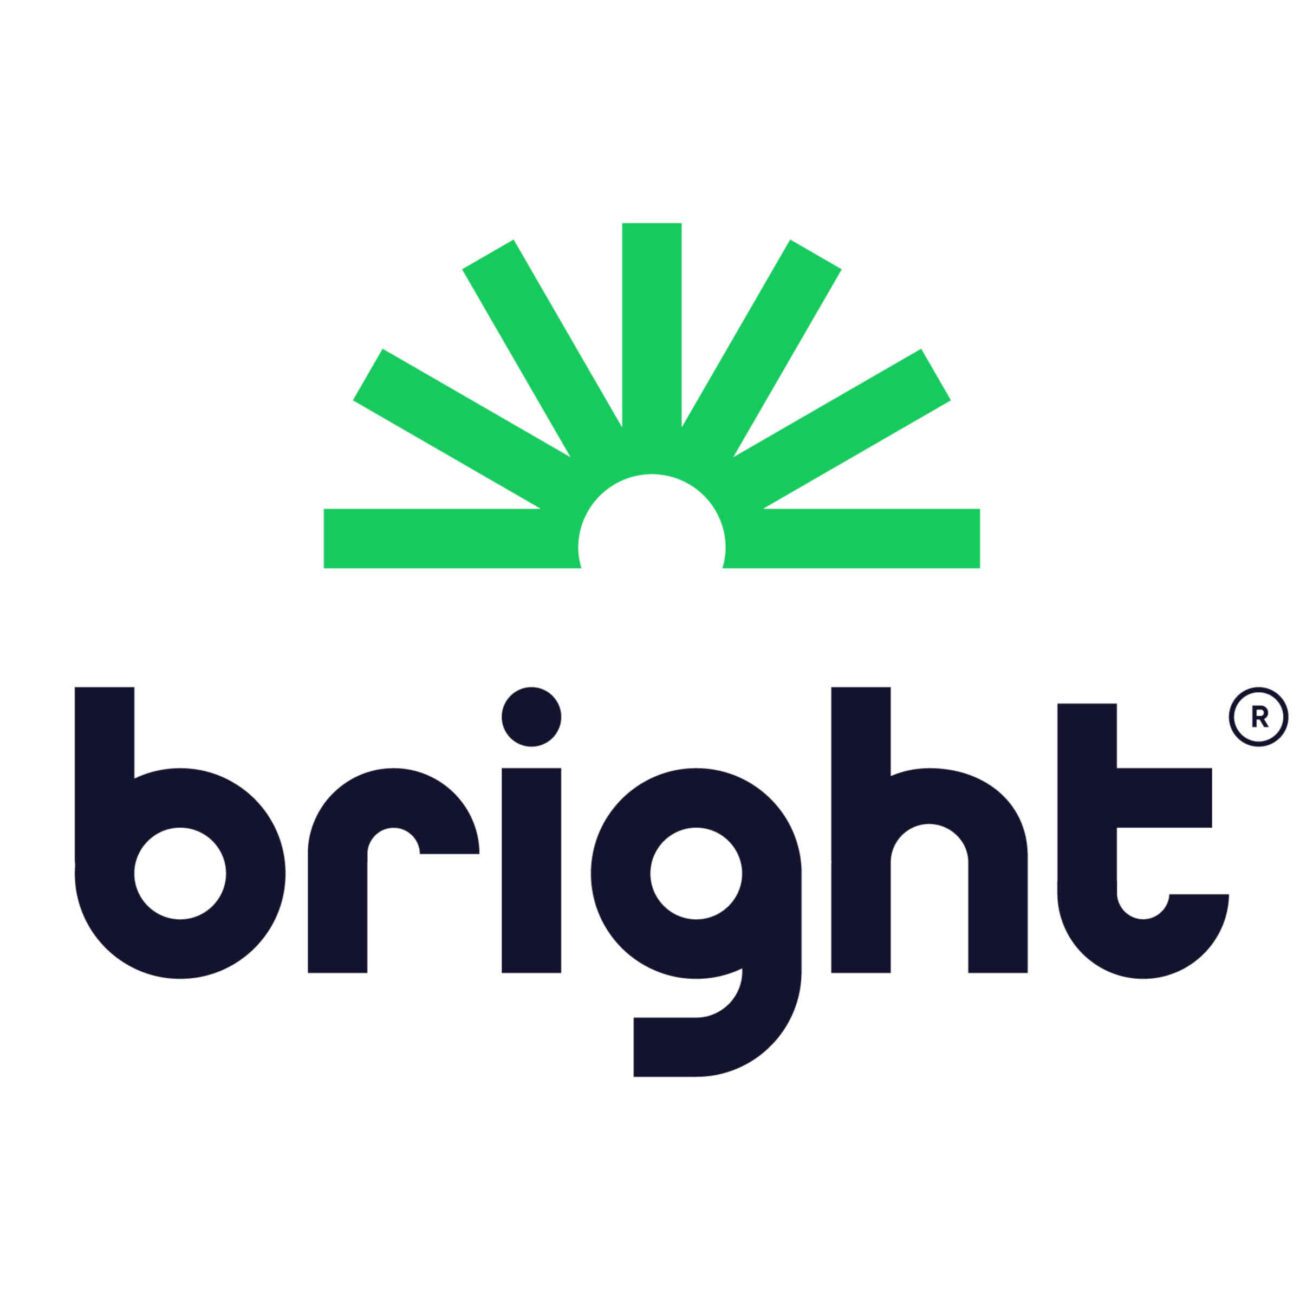 From automatic saving to budget planning, take notes as you learn more about how Bright has everything you need to start building your credit!